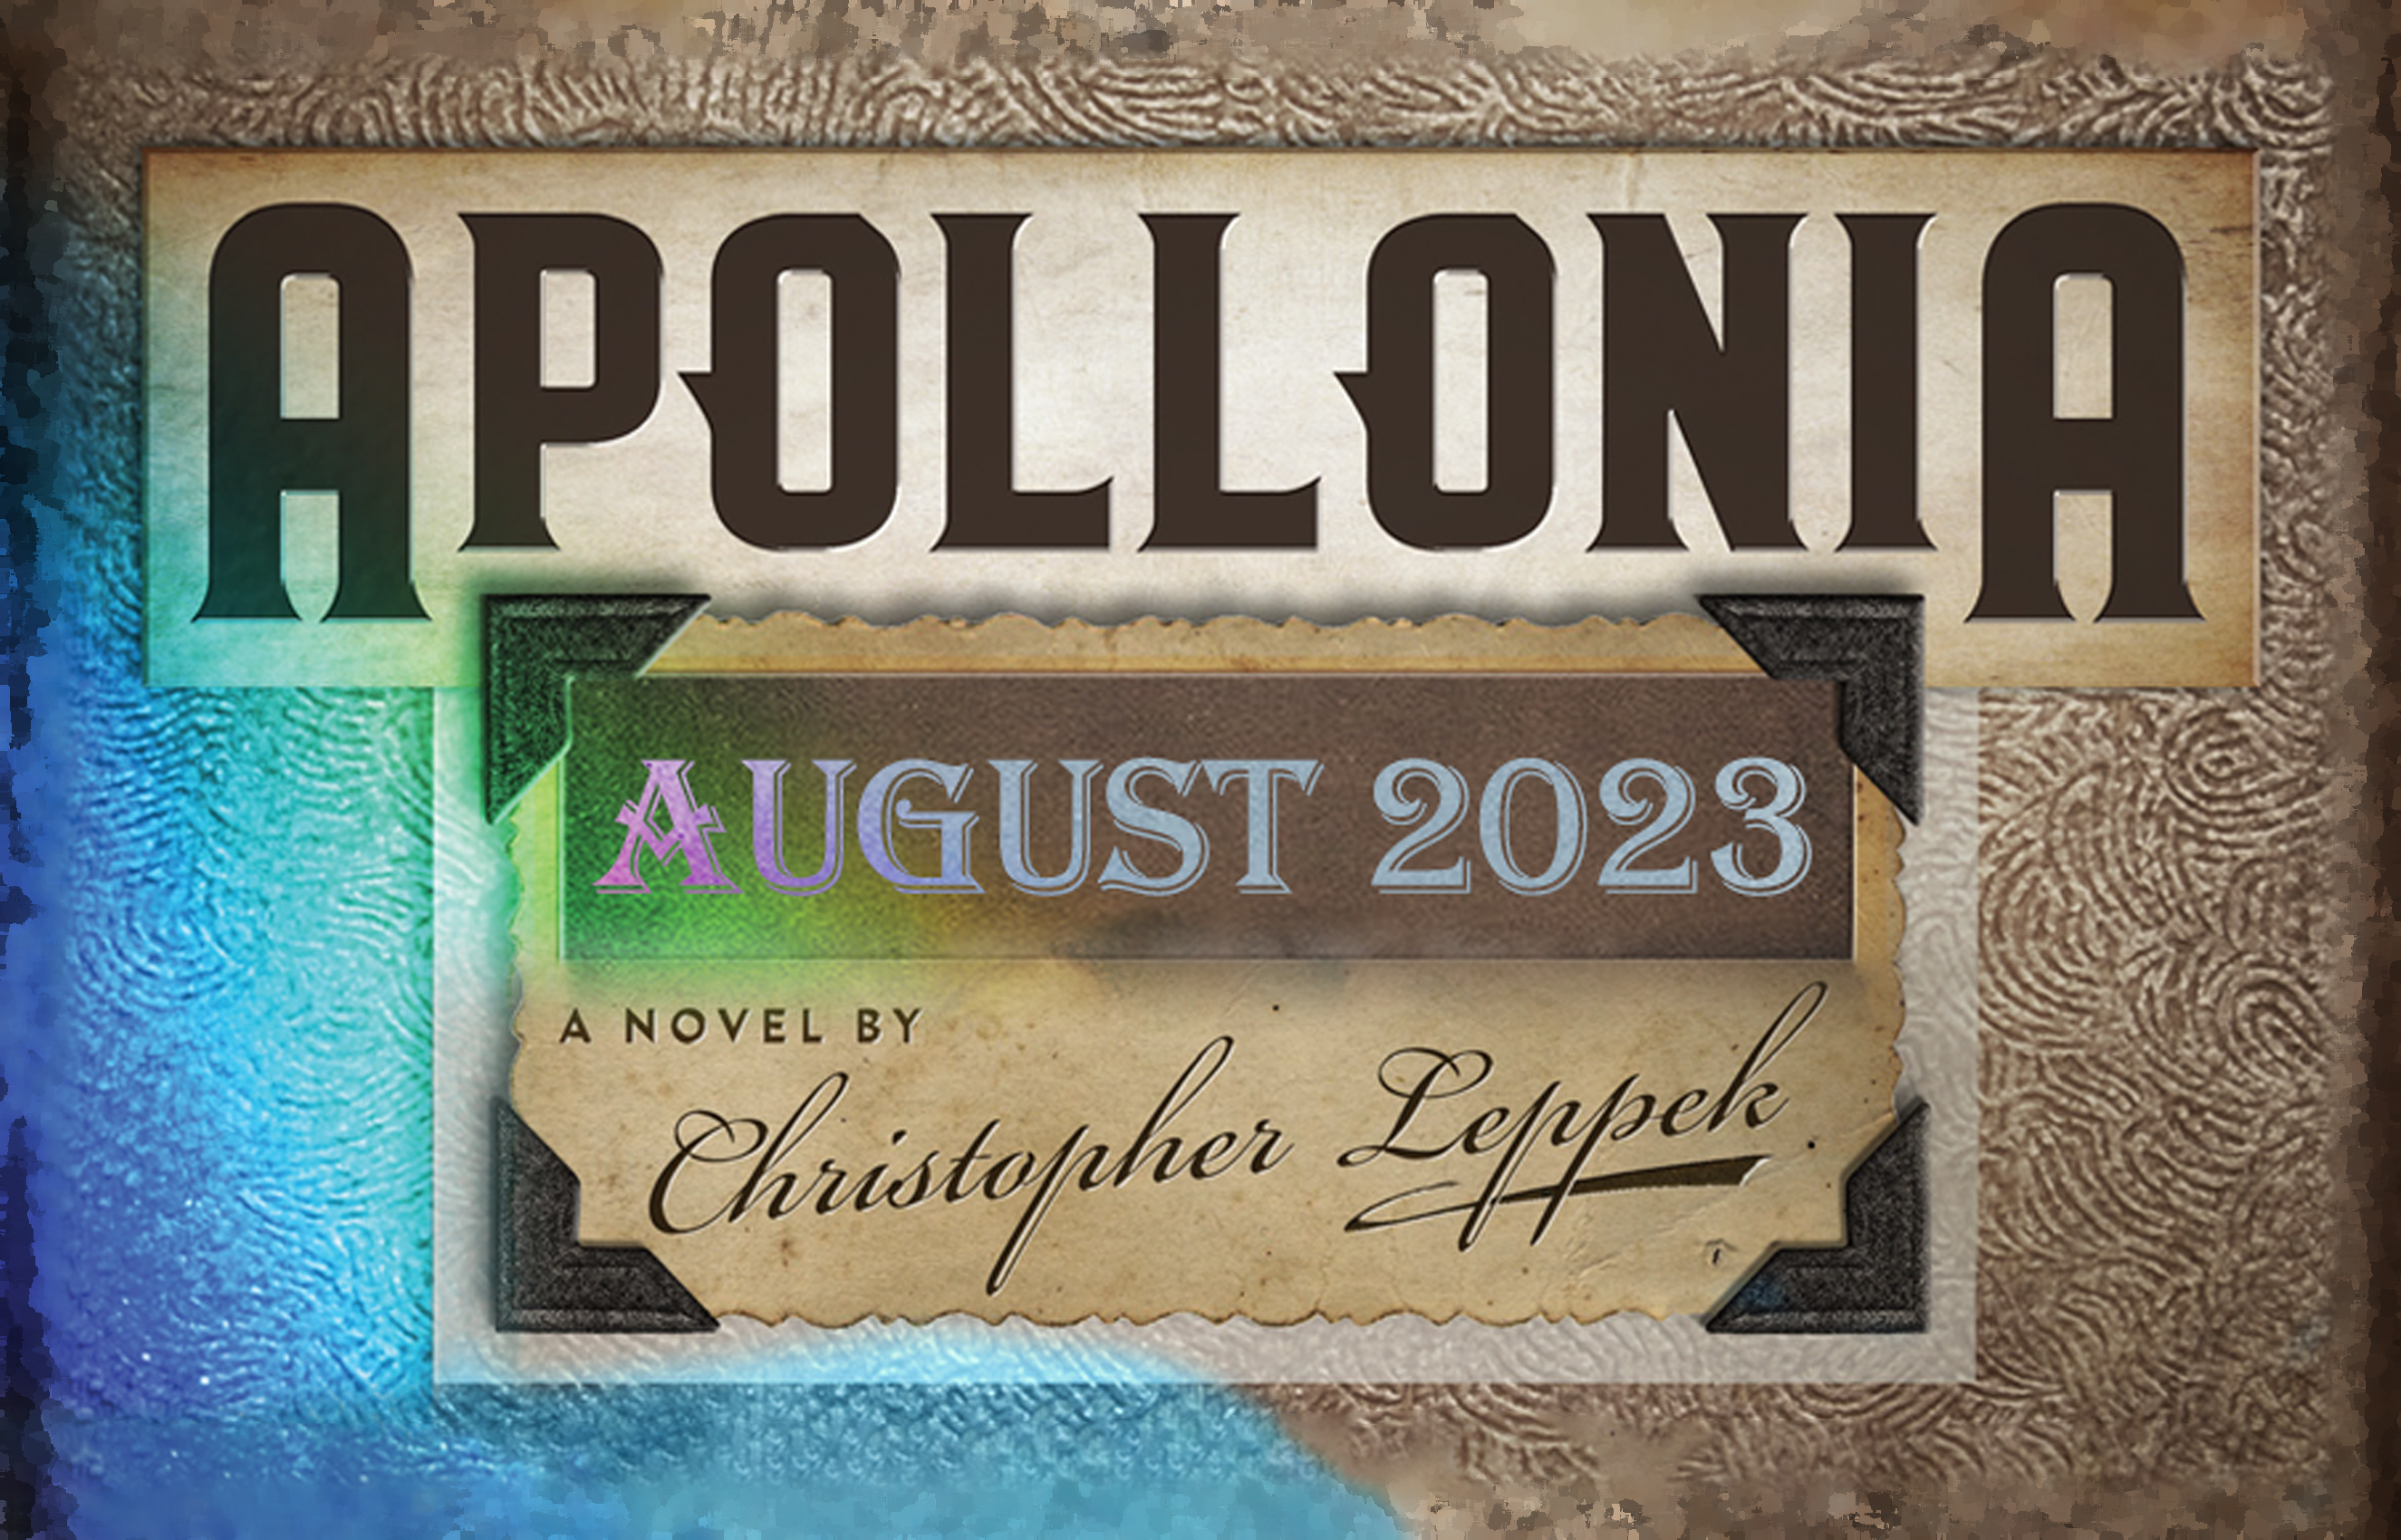 New editions of "Apollonia" by Christopher Leppek coming in August 2023 ...